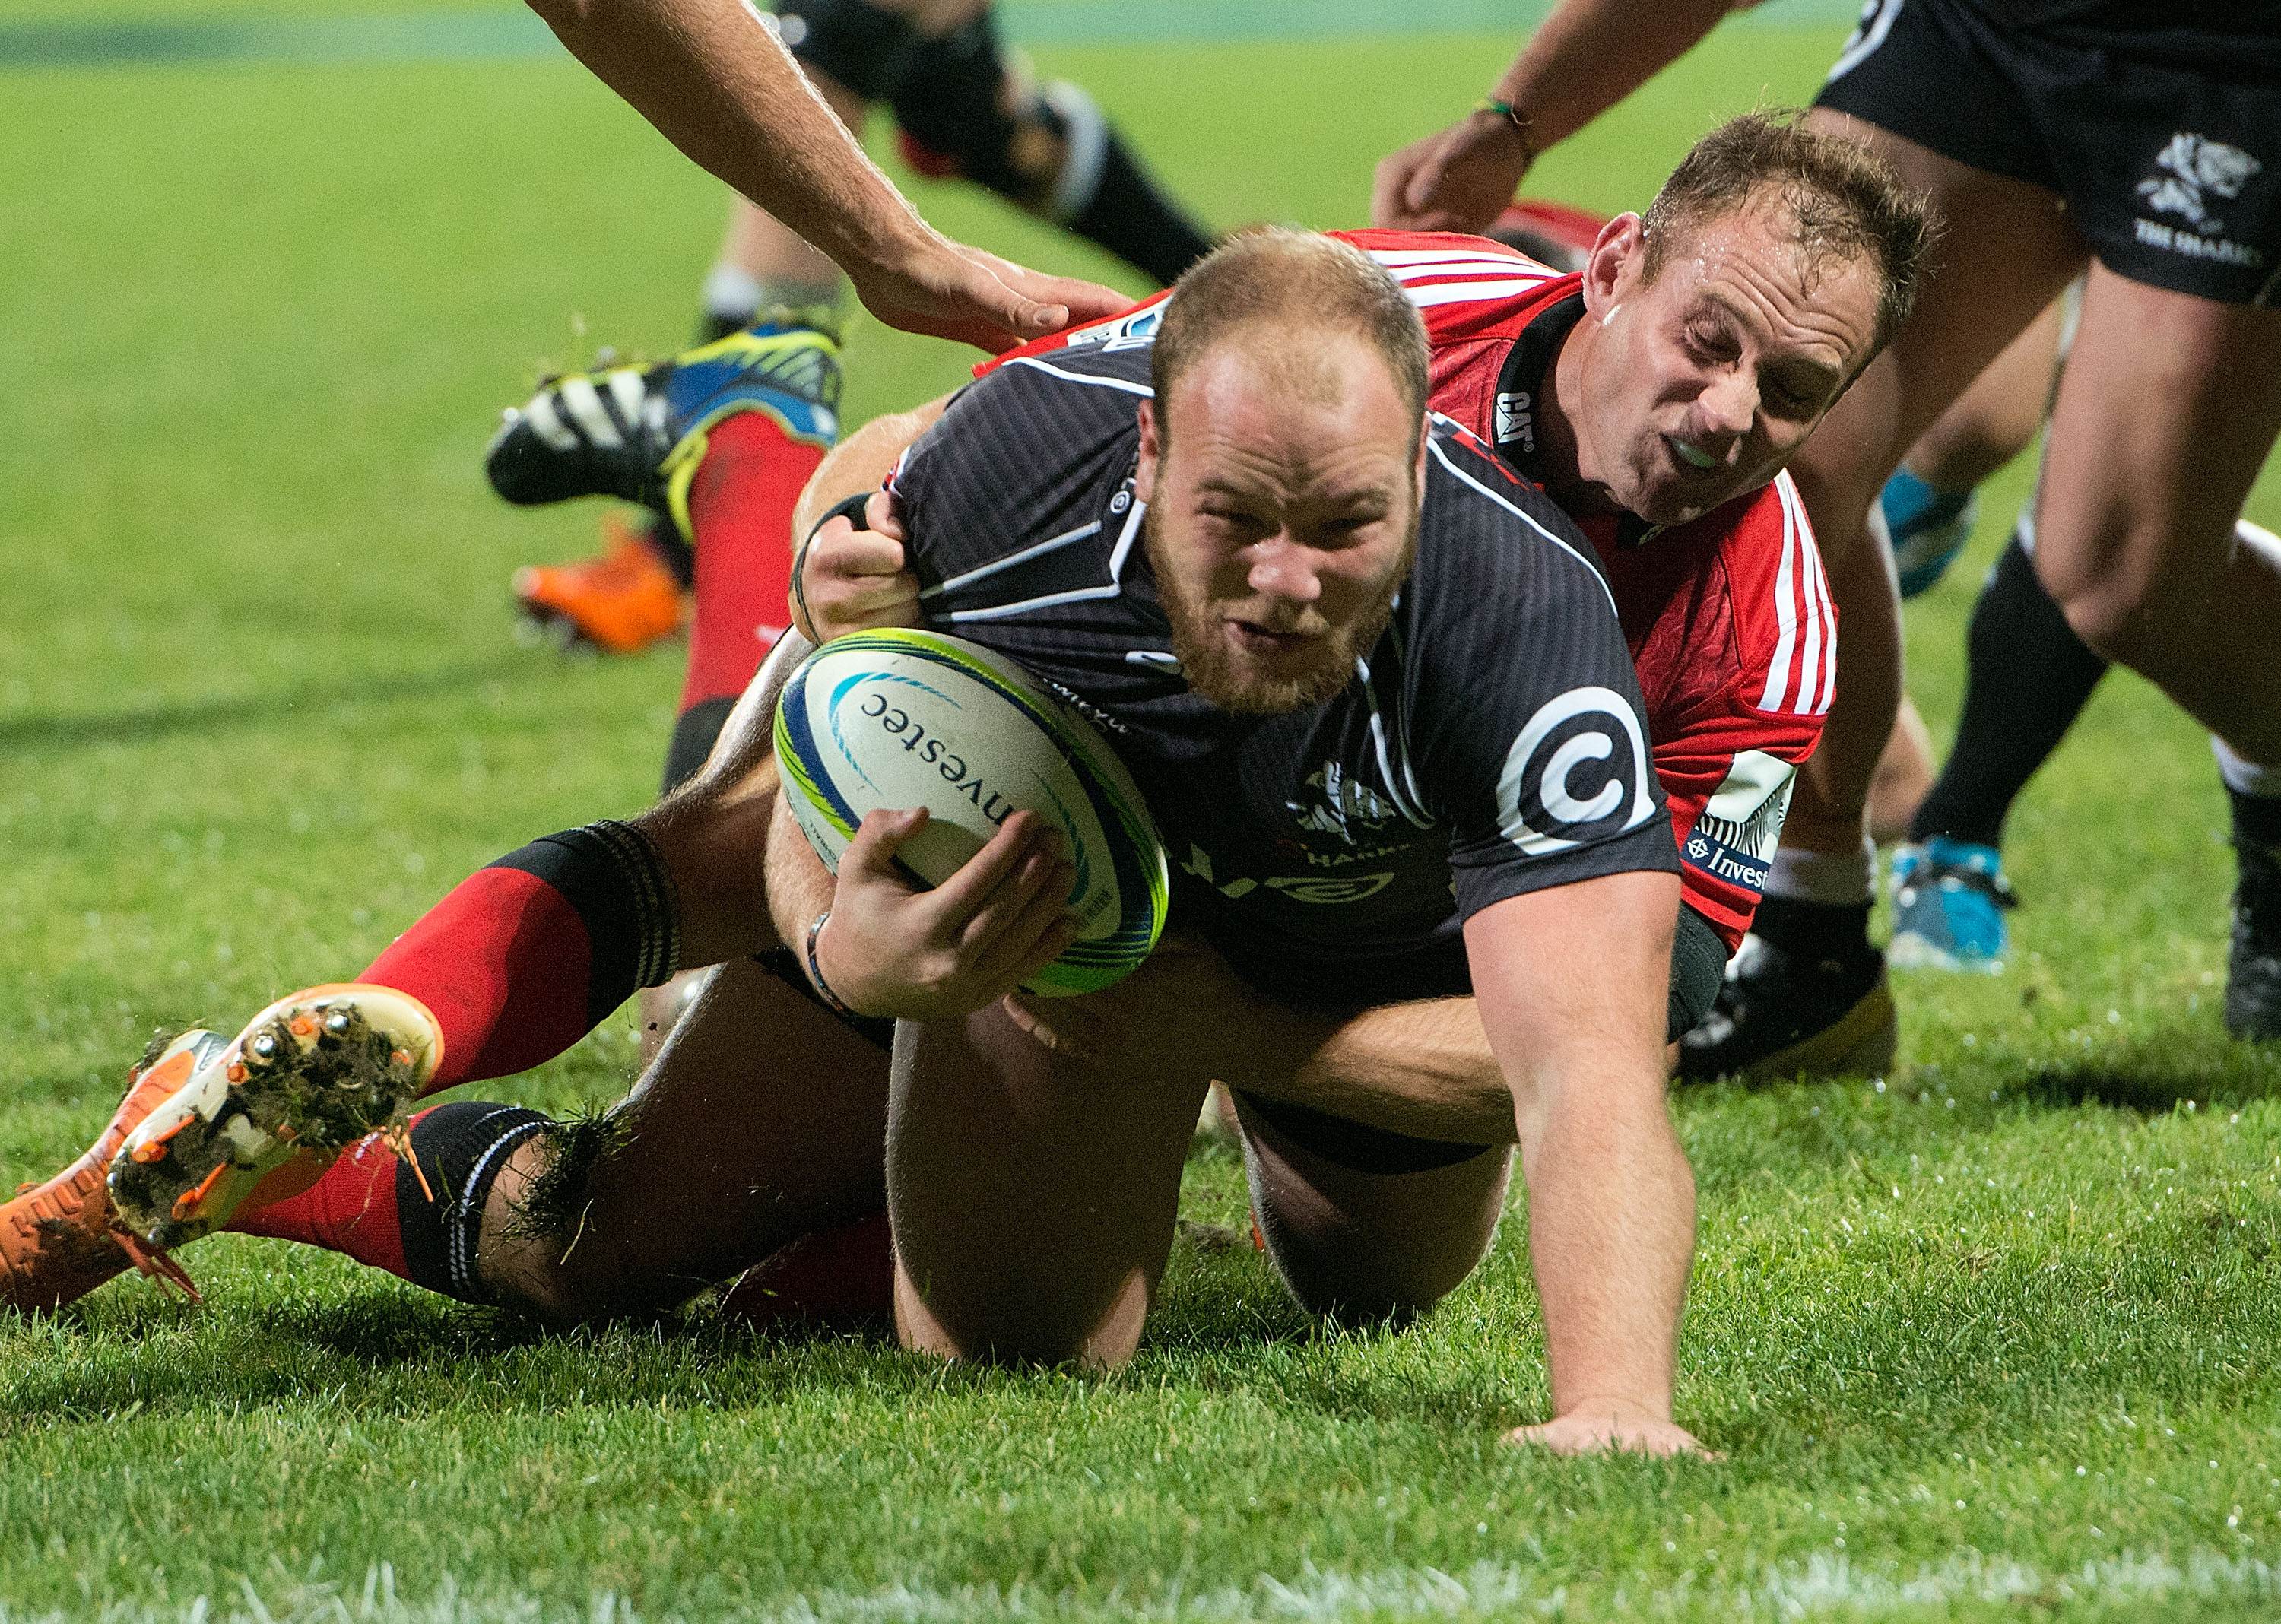 Kyle Cooper of the Sharks scores despite the attention of Crusaders' scrum-half Andy Ellis during their clash in May. The Crusaders turned in a poor performance on that occasion, but expect to turn the tide in their Super 15 semi-final. Photo: AFP